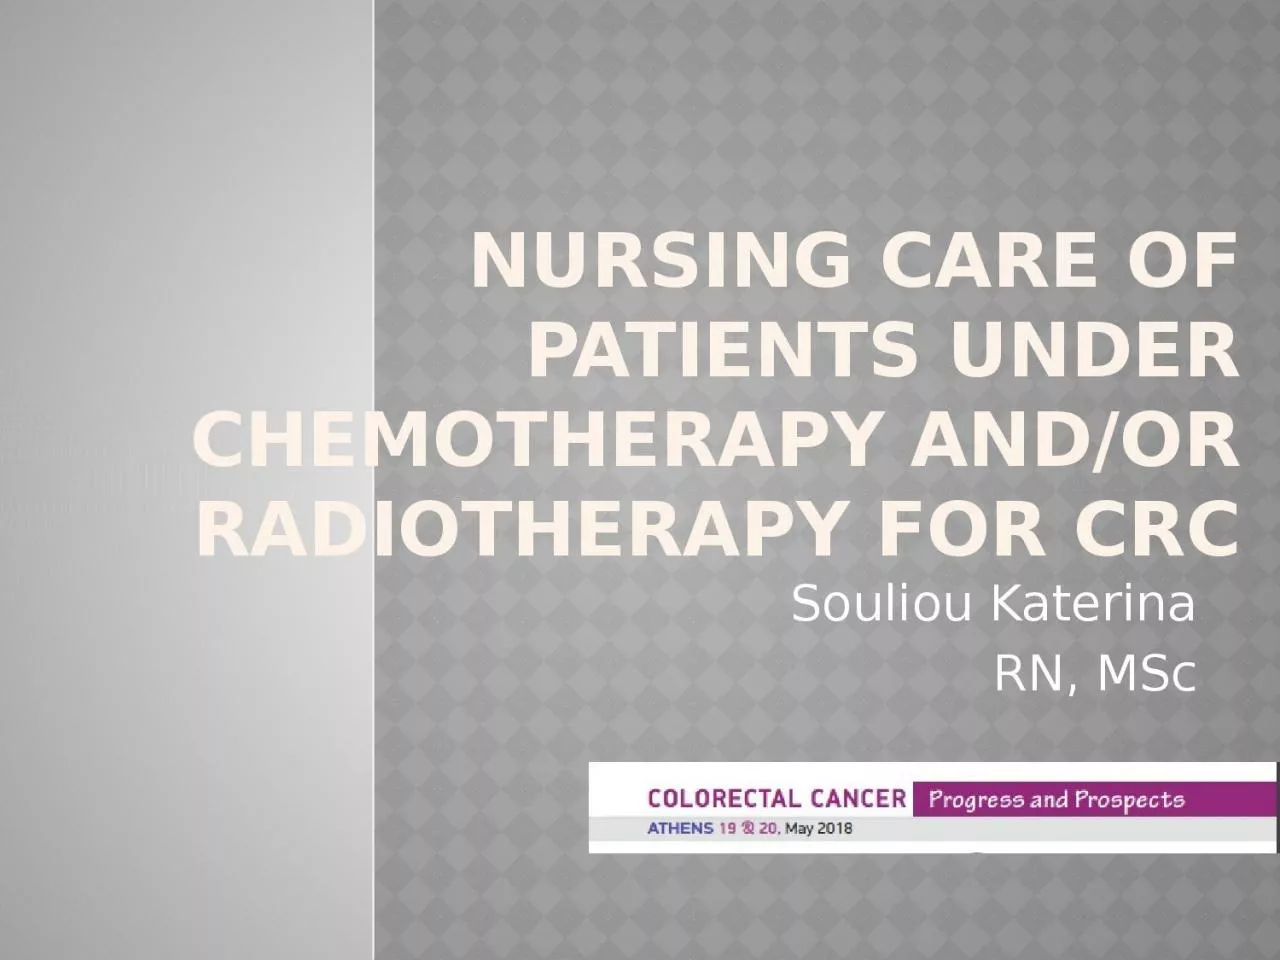 Nursing care of patients under chemotherapy and/or radiotherapy for CRC